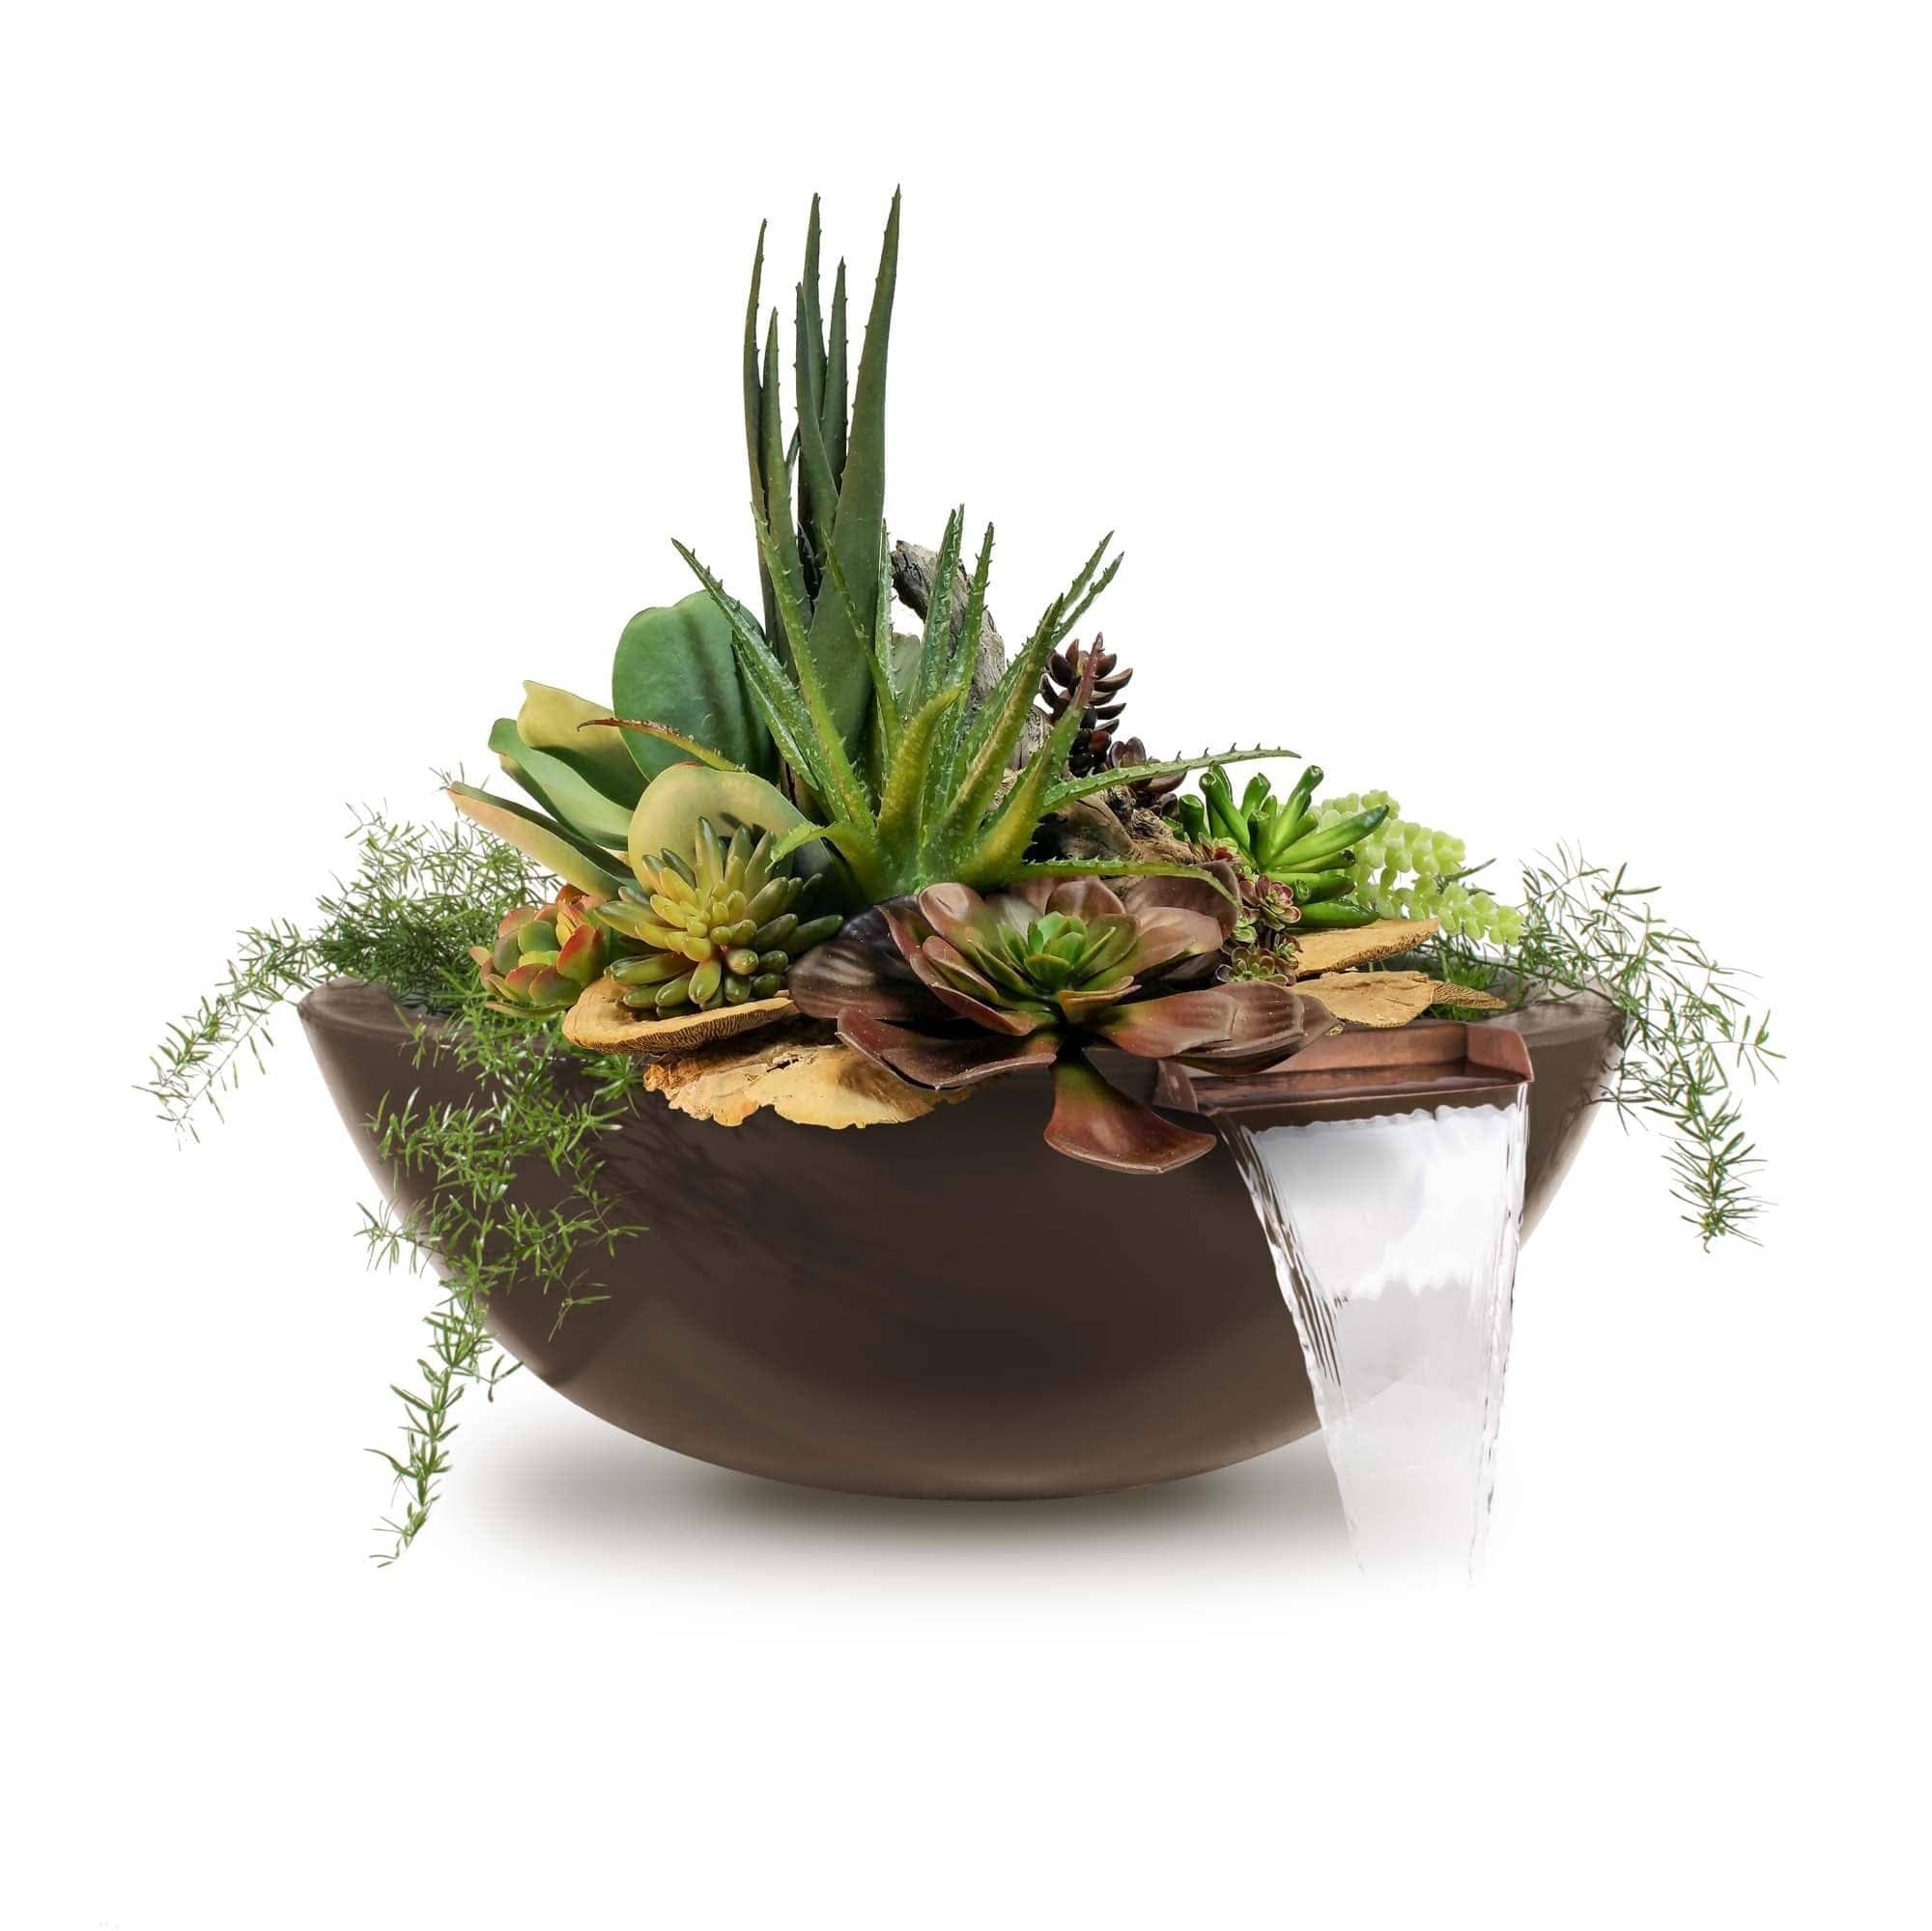 The Outdoor Plus Sedona Planter and Water Bowl - Concrete